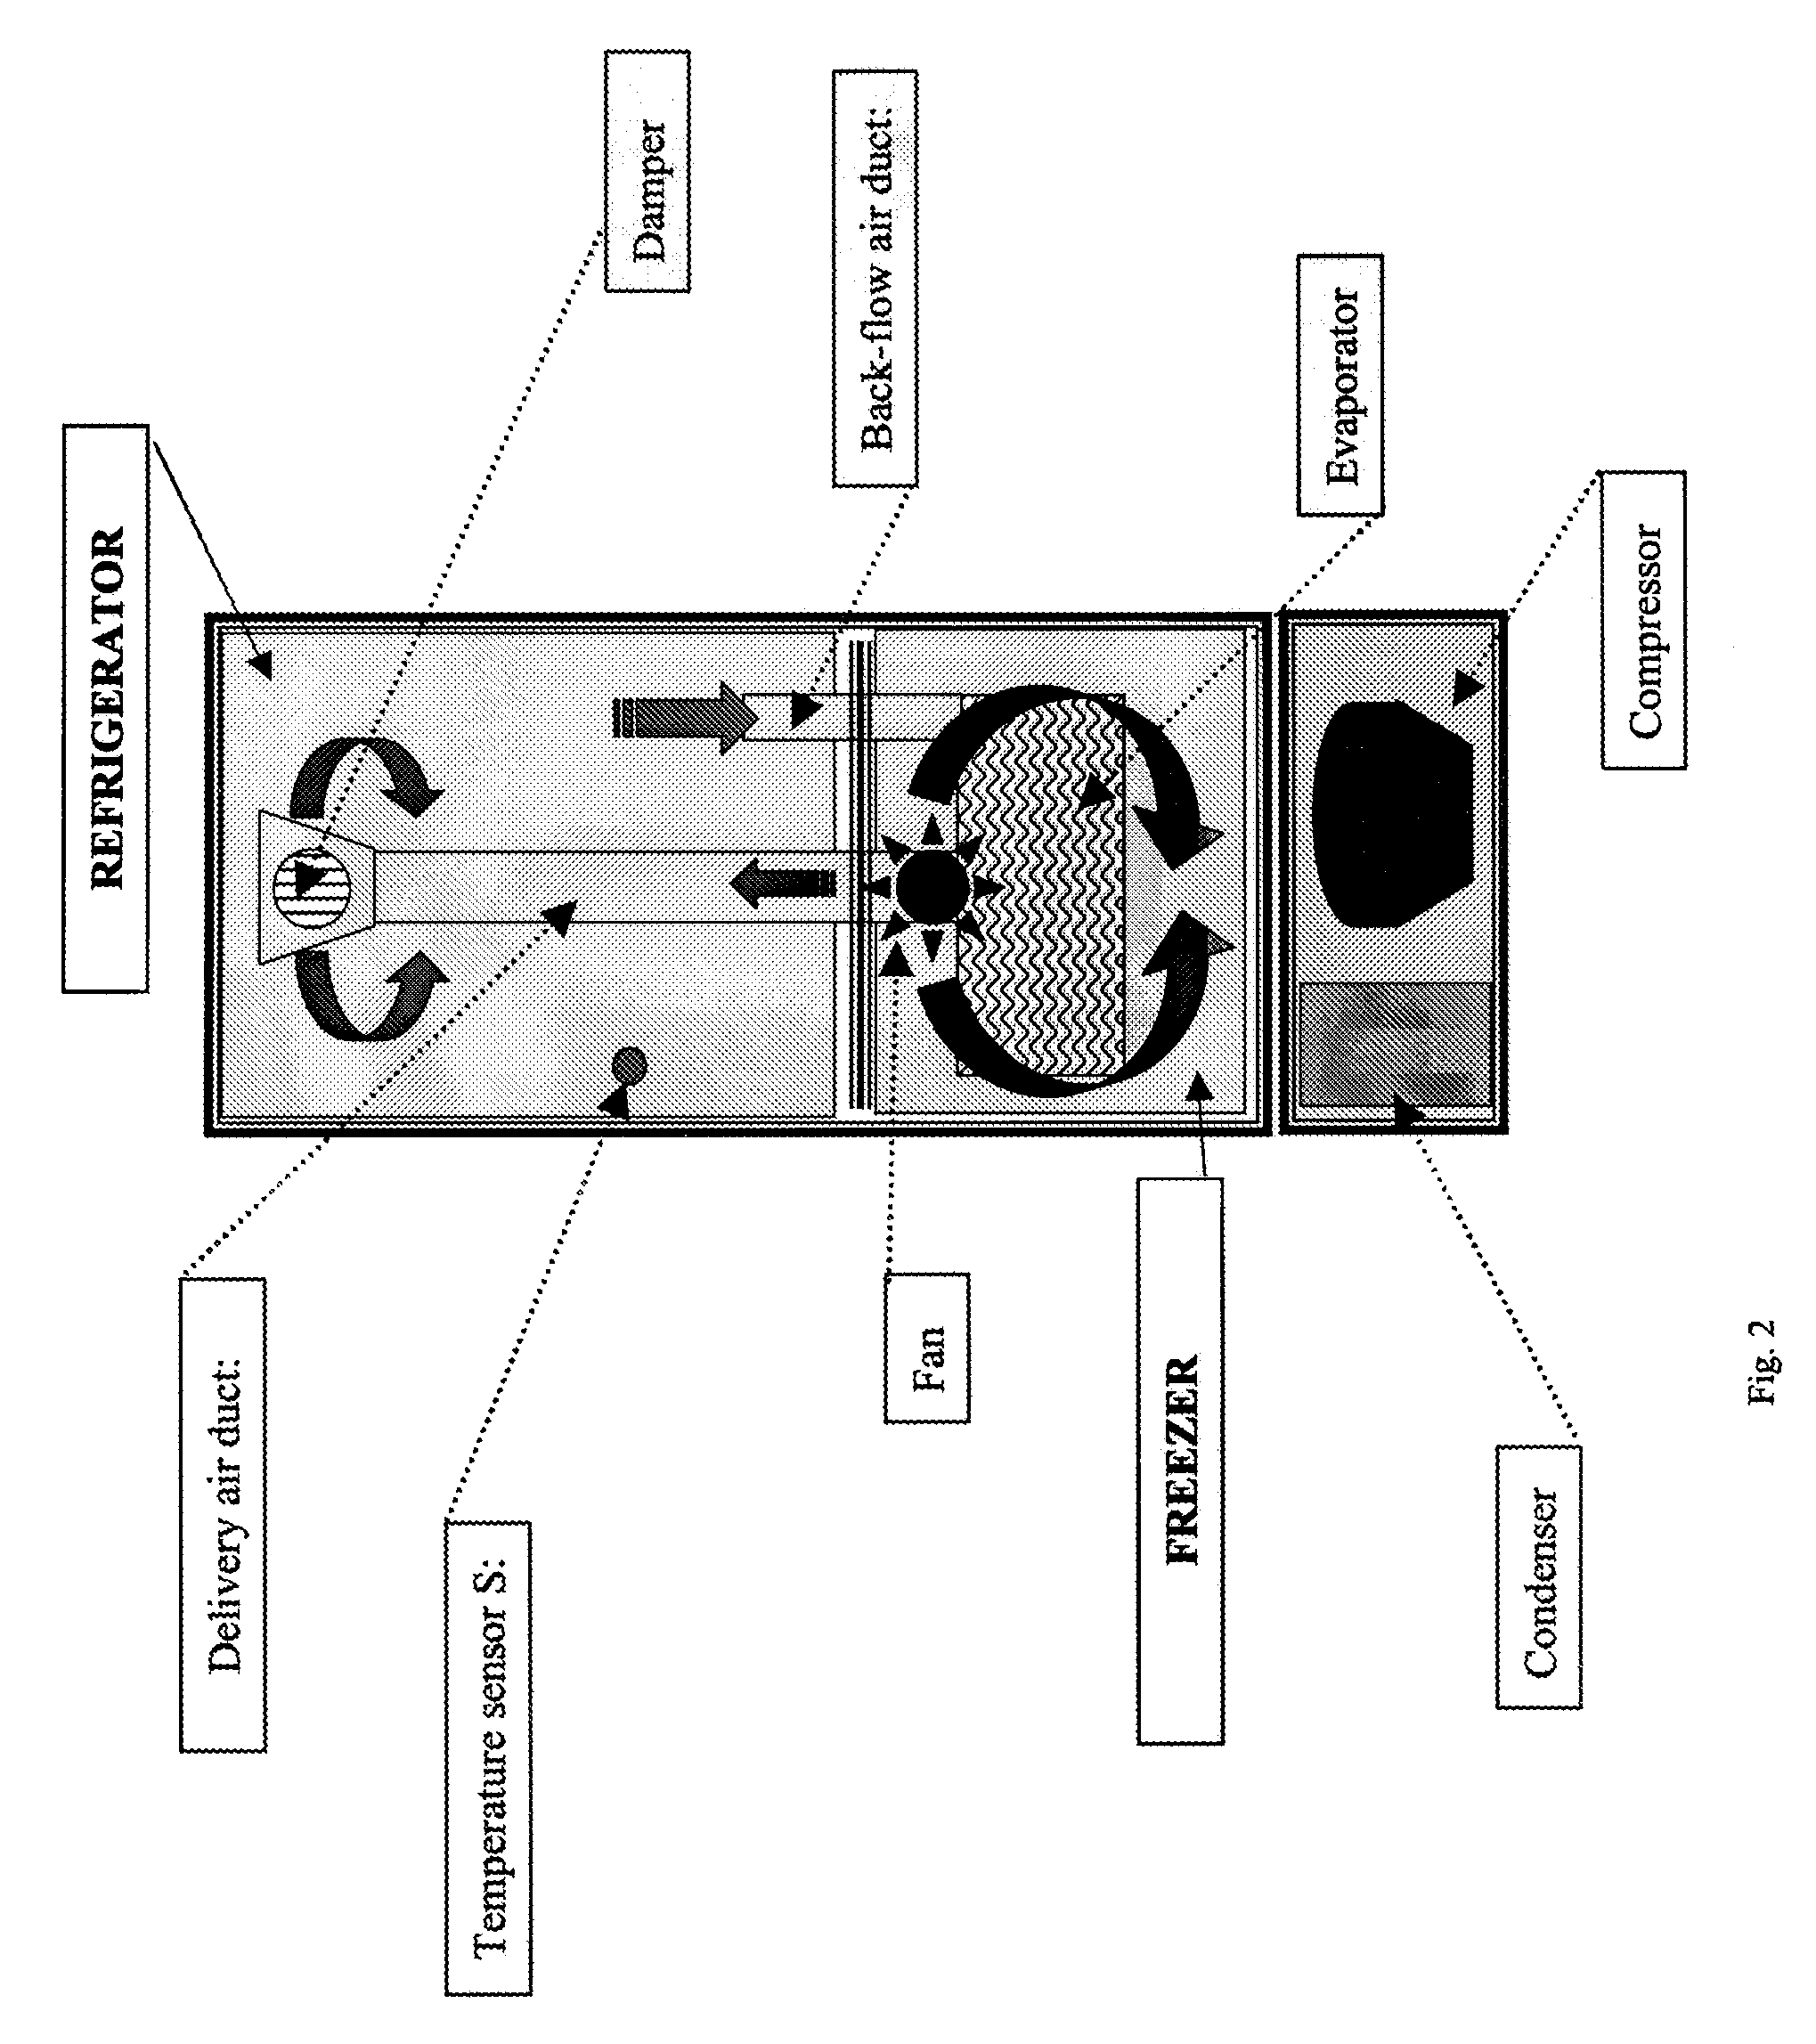 Method for estimating the food temperature inside a refrigerator cavity and refrigerator using such method